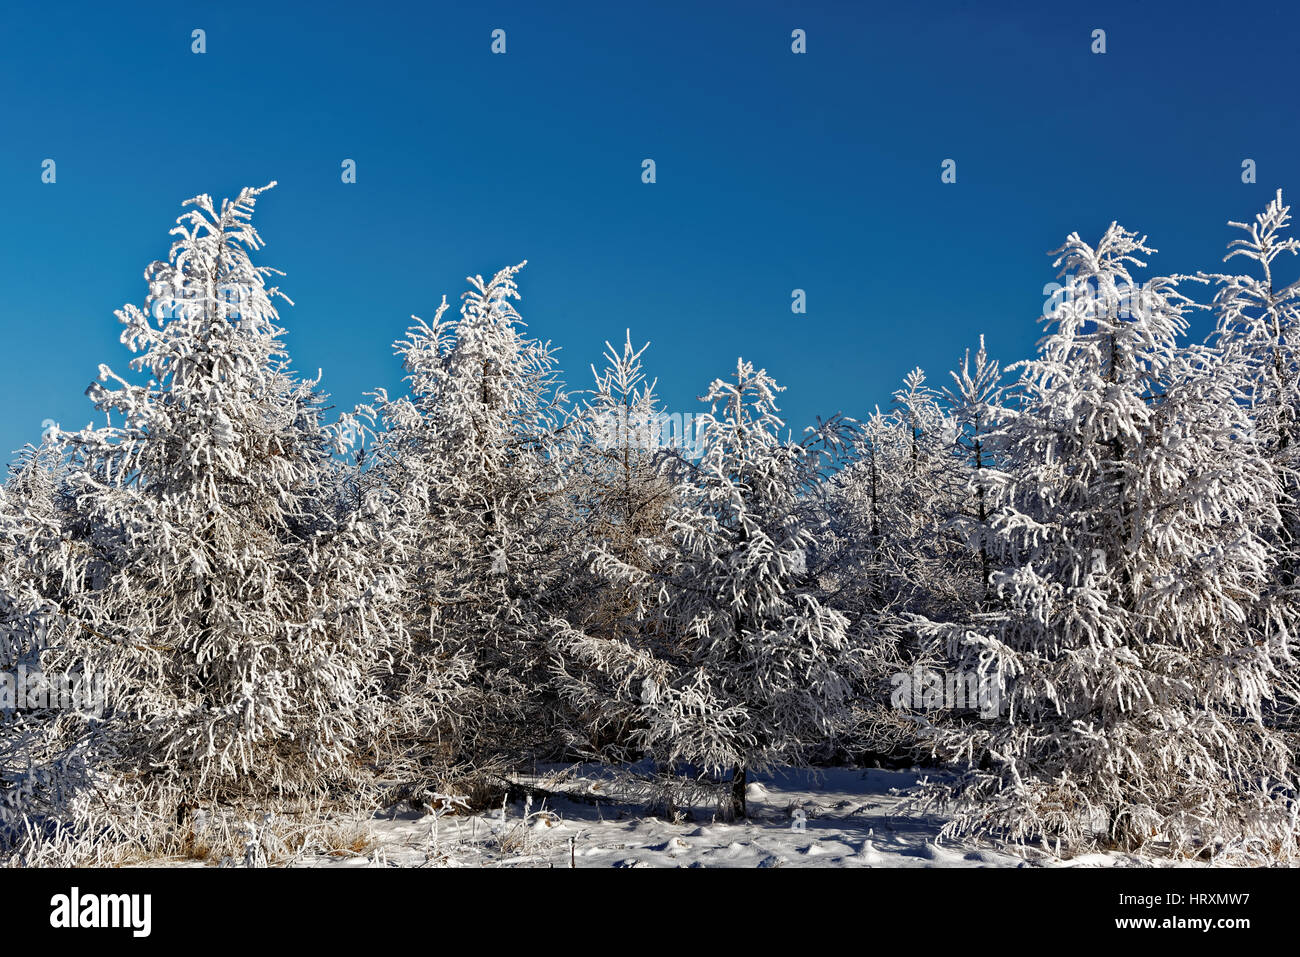 Young larch trees in winter Stock Photo